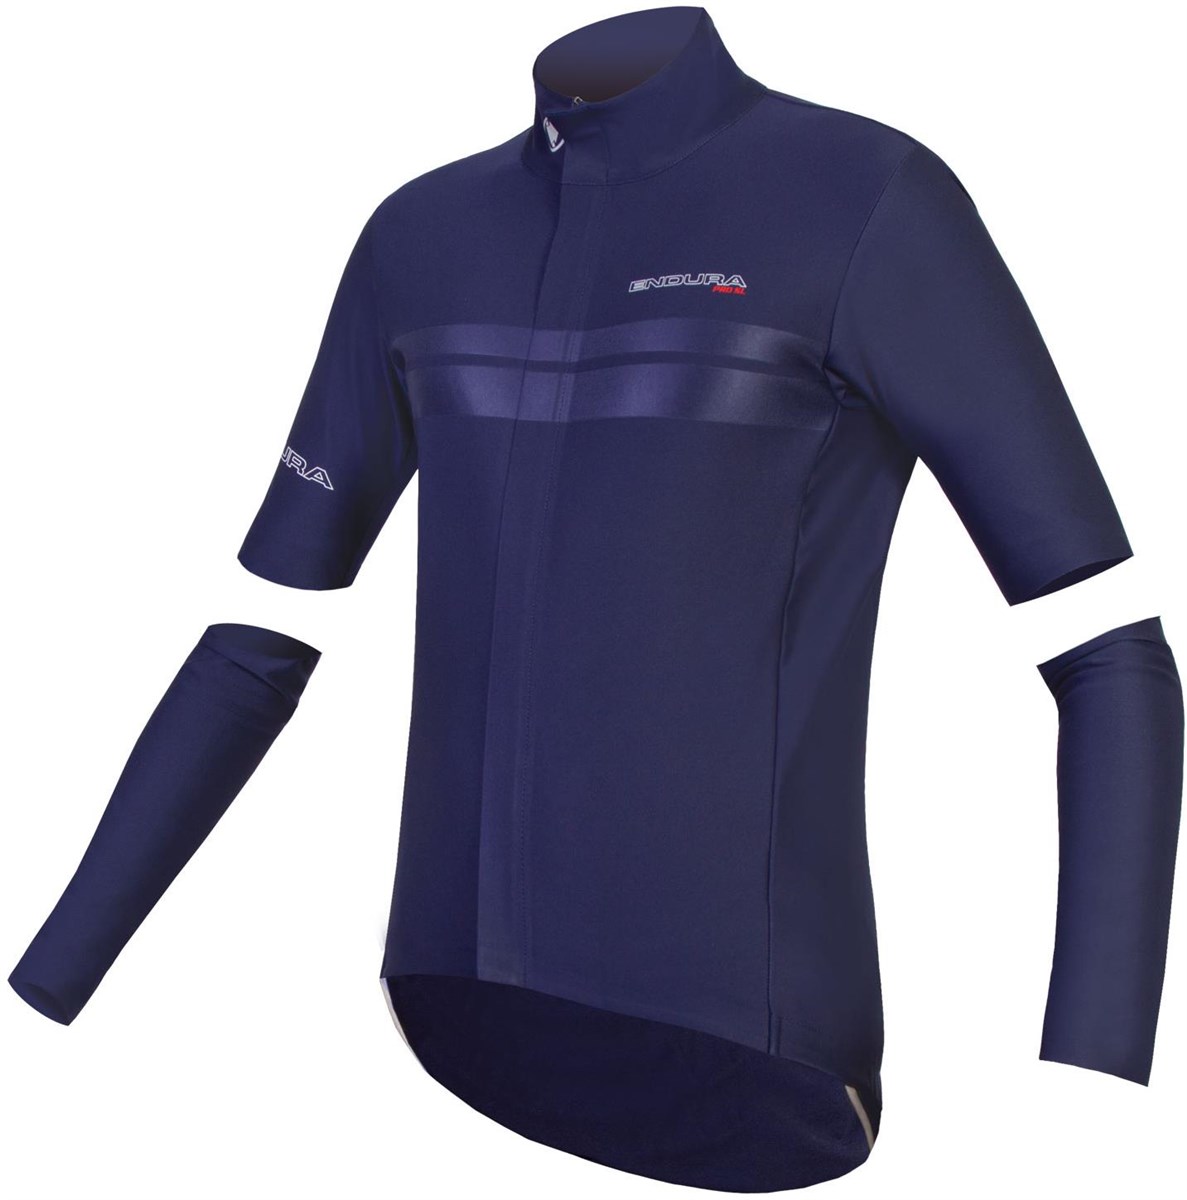 Endura Pro Classics II Short Sleeve Jersey with Arm Warmers product image